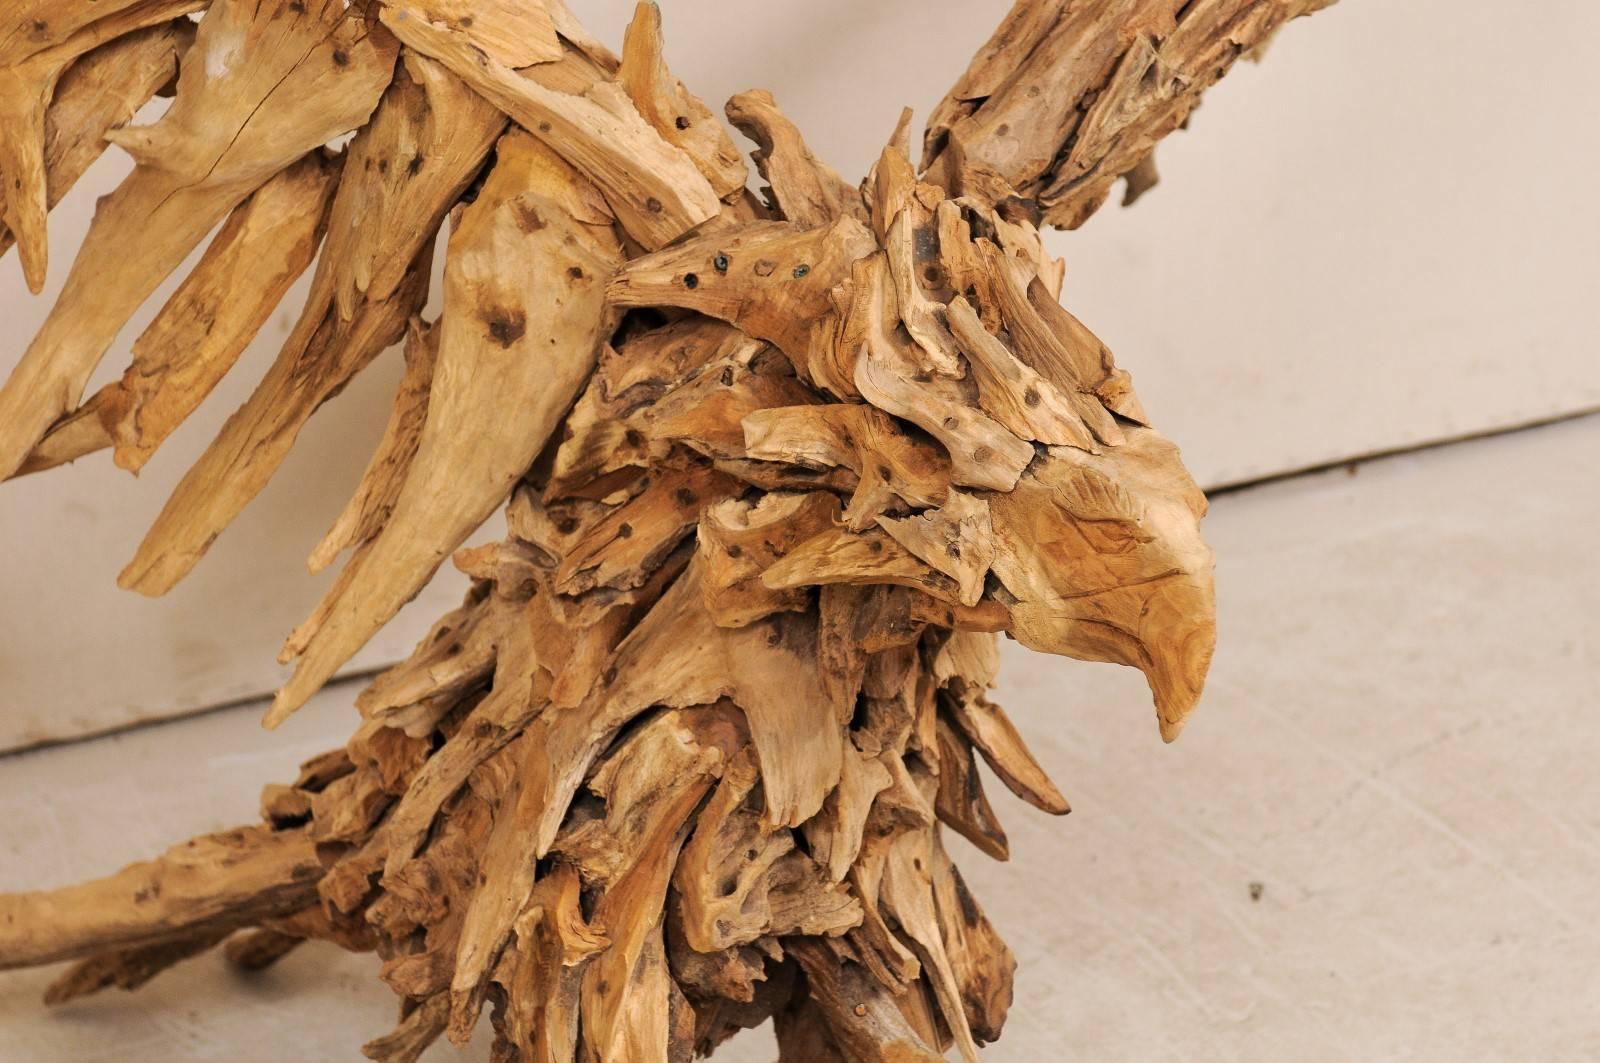 Asian  Eagle Sculpture Artisan-Crafted from Driftwood, 4.5 Ft Tall w/ 6+ Ft Wing-Span For Sale